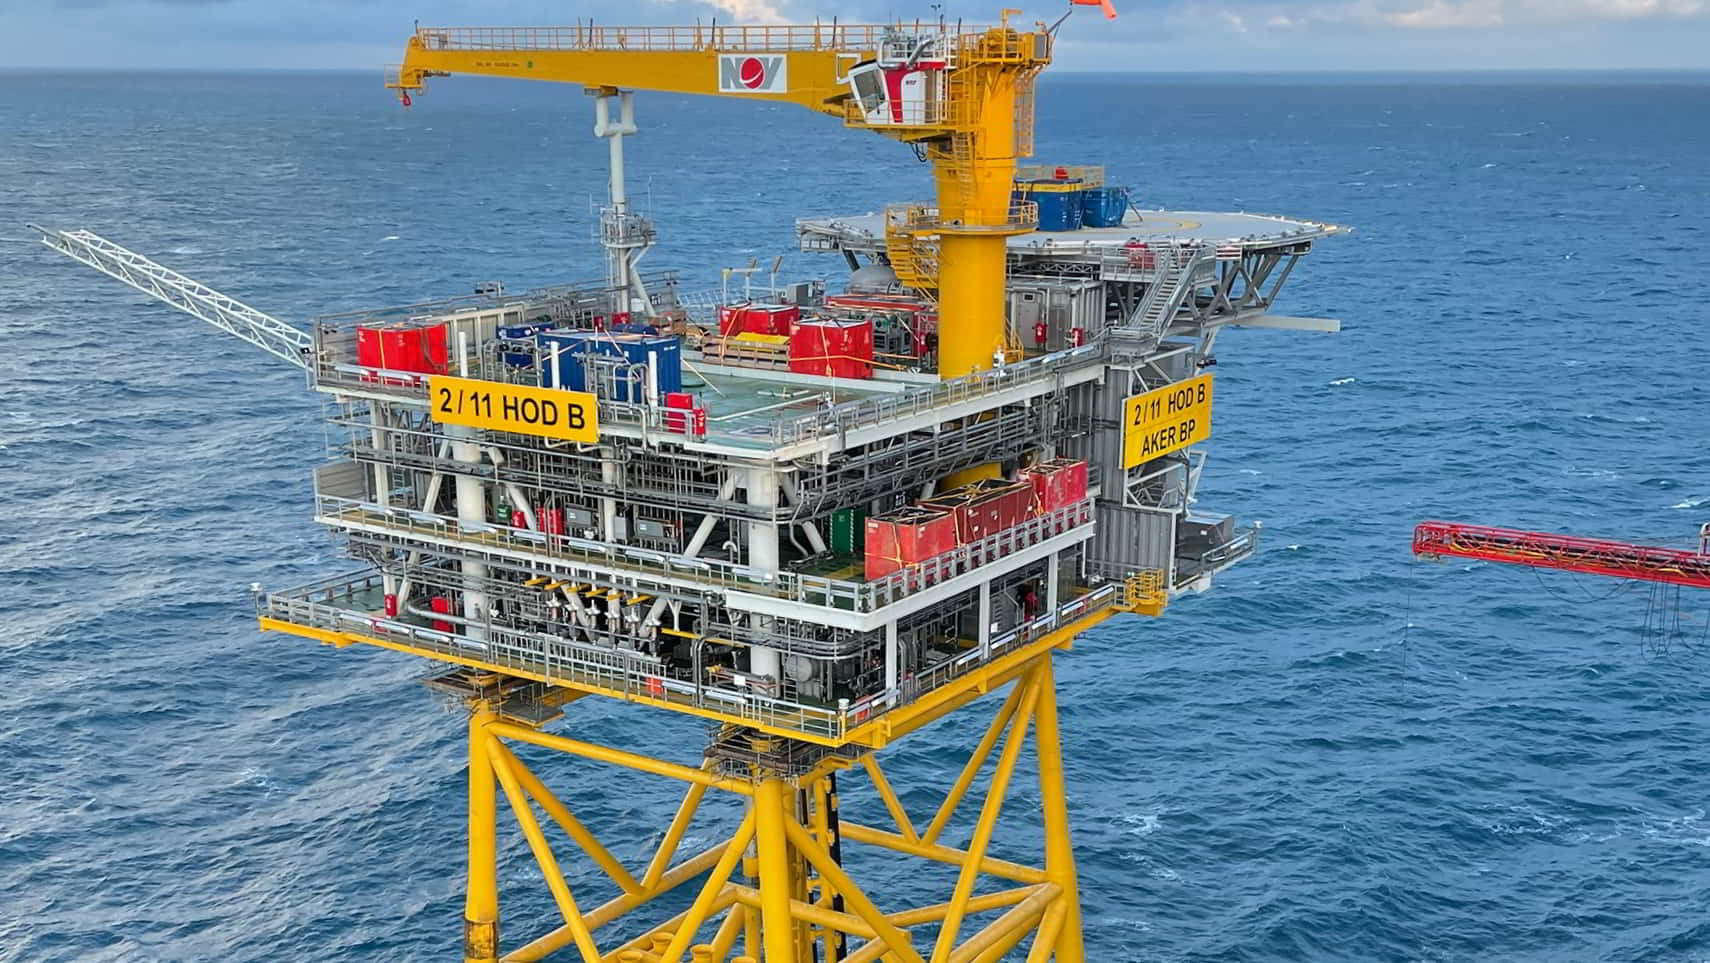 Aker BP wins regulator’s stamp of approval to use Hod B platform at North Sea field